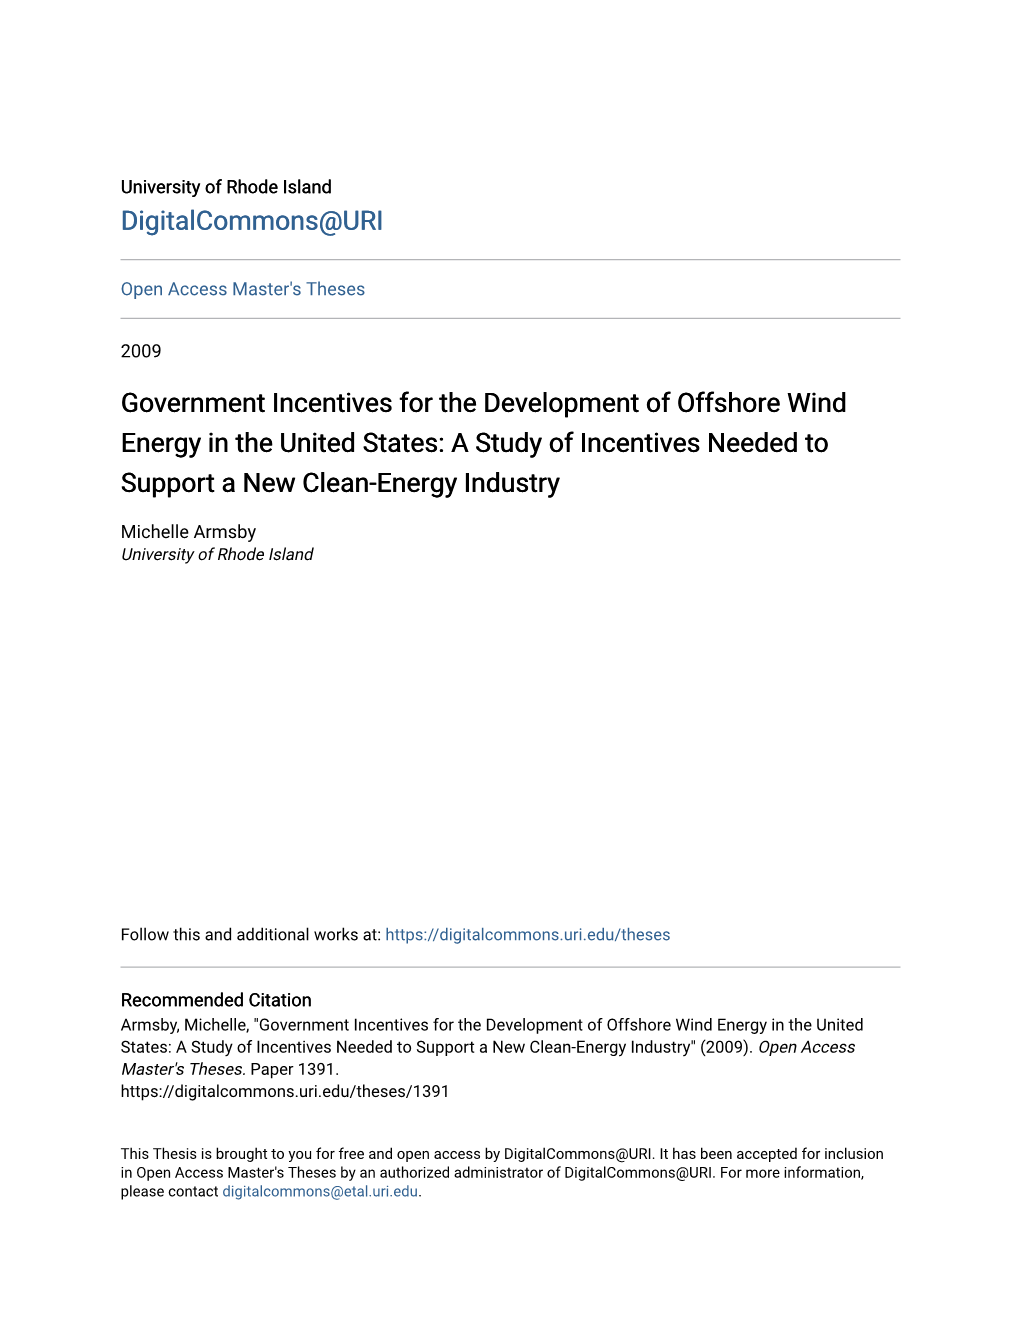 Government Incentives for the Development of Offshore Wind Energy in the United States: a Study of Incentives Needed to Support a New Clean-Energy Industry